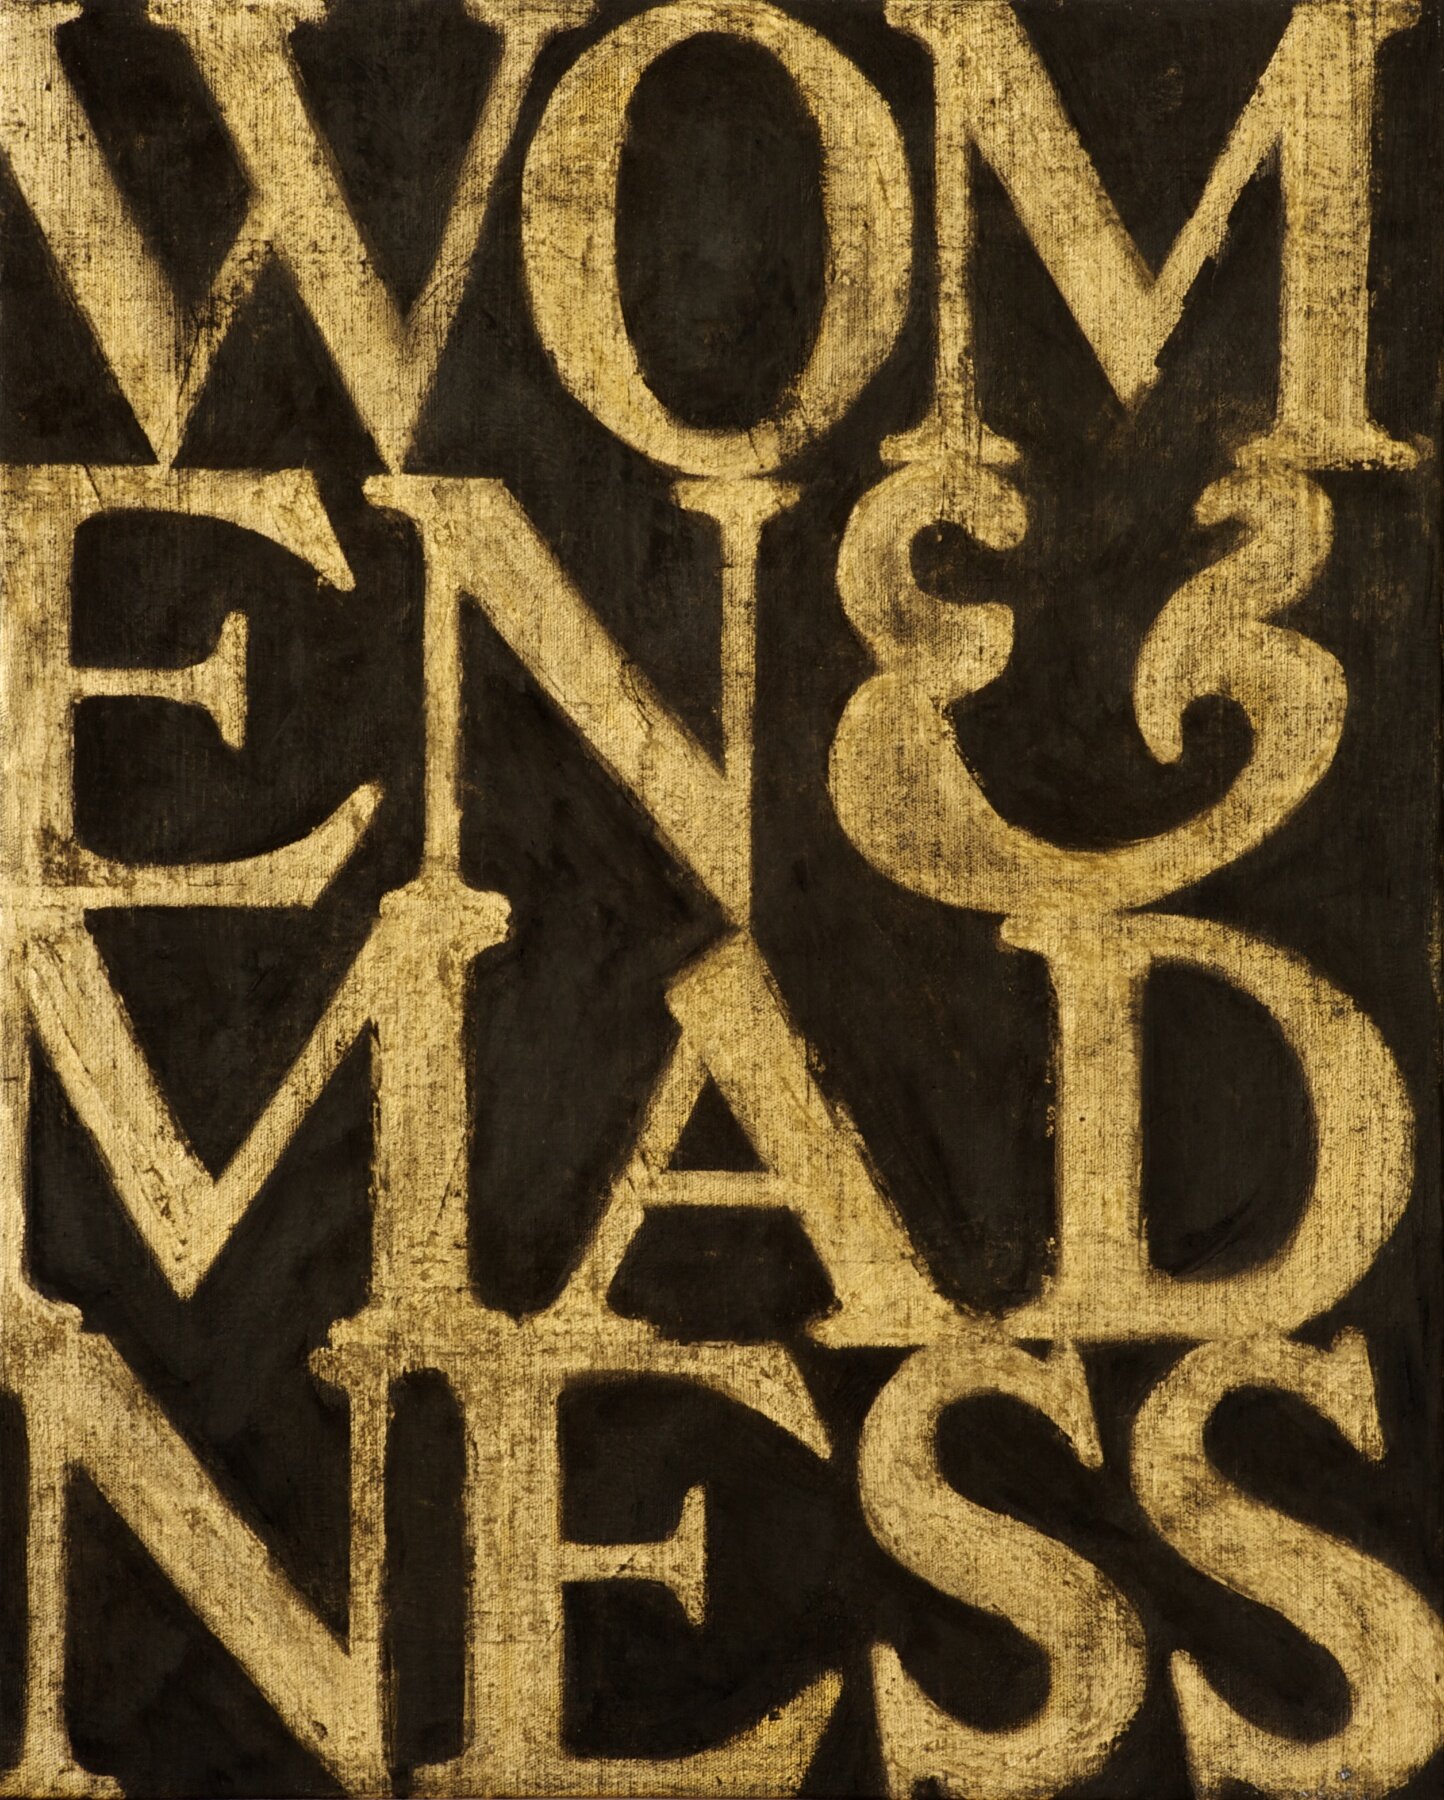 Women and Madness, no. 2